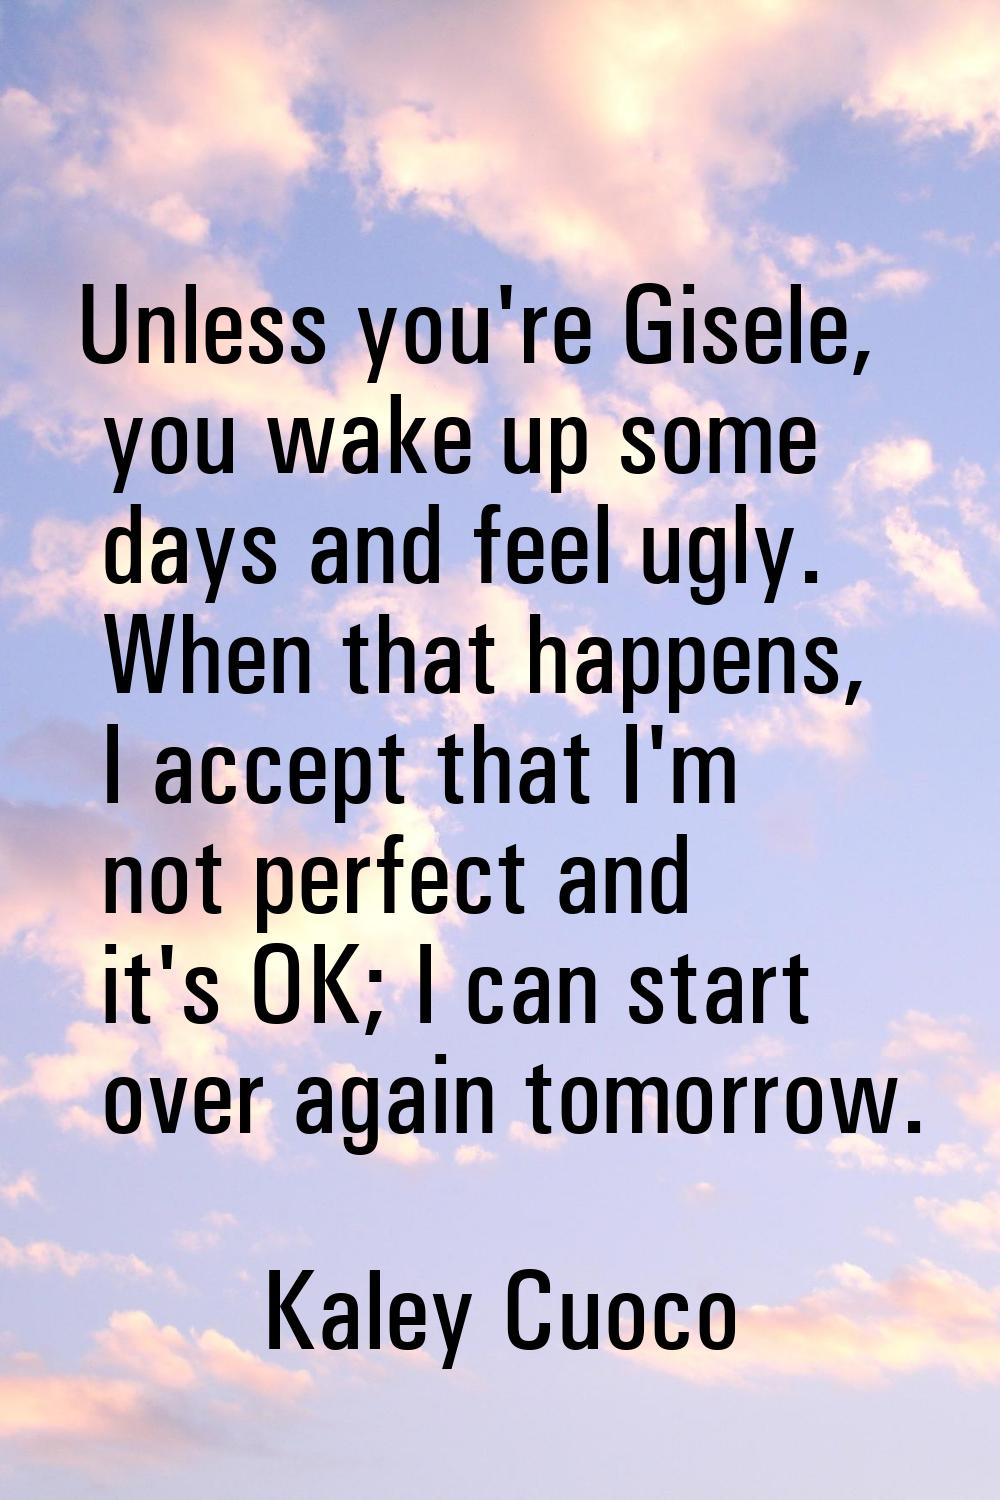 Unless you're Gisele, you wake up some days and feel ugly. When that happens, I accept that I'm not